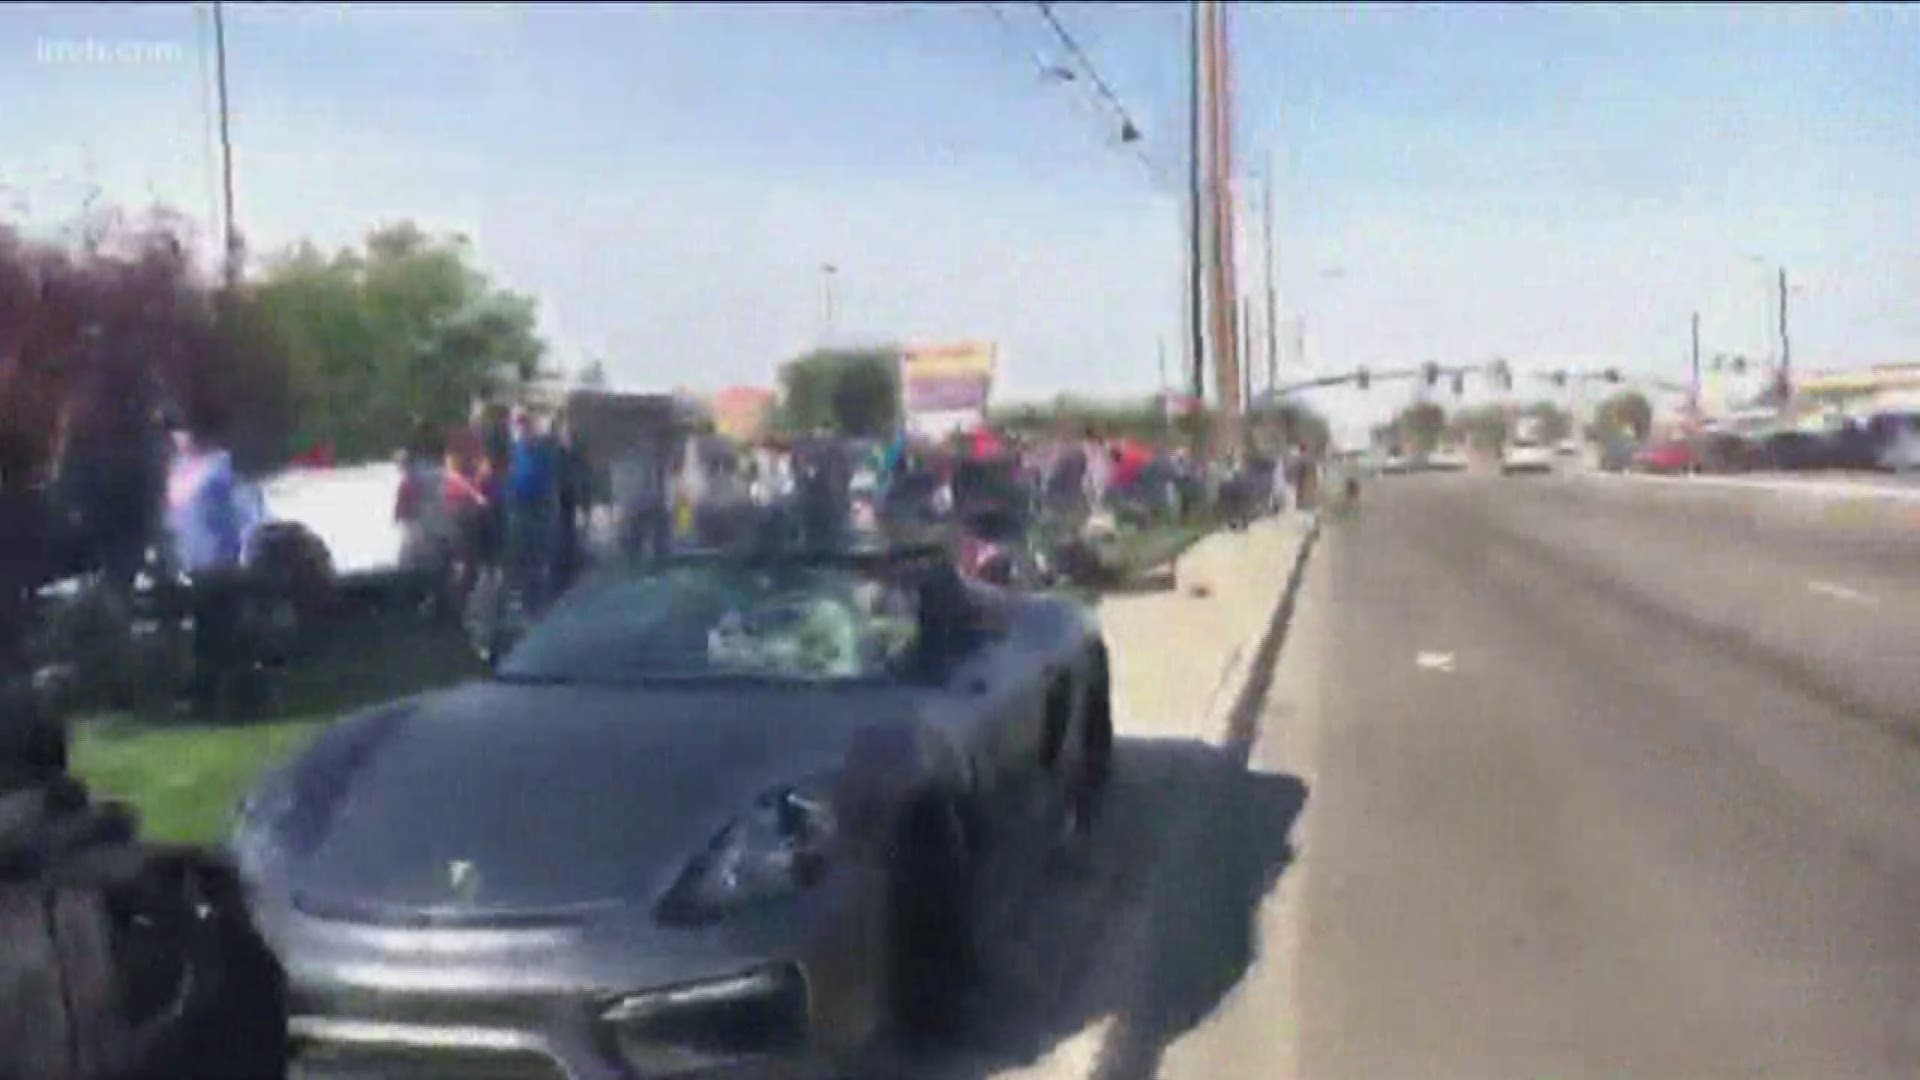 The man lost control of his Porsche and went onto a sidewalk and into a crowd.